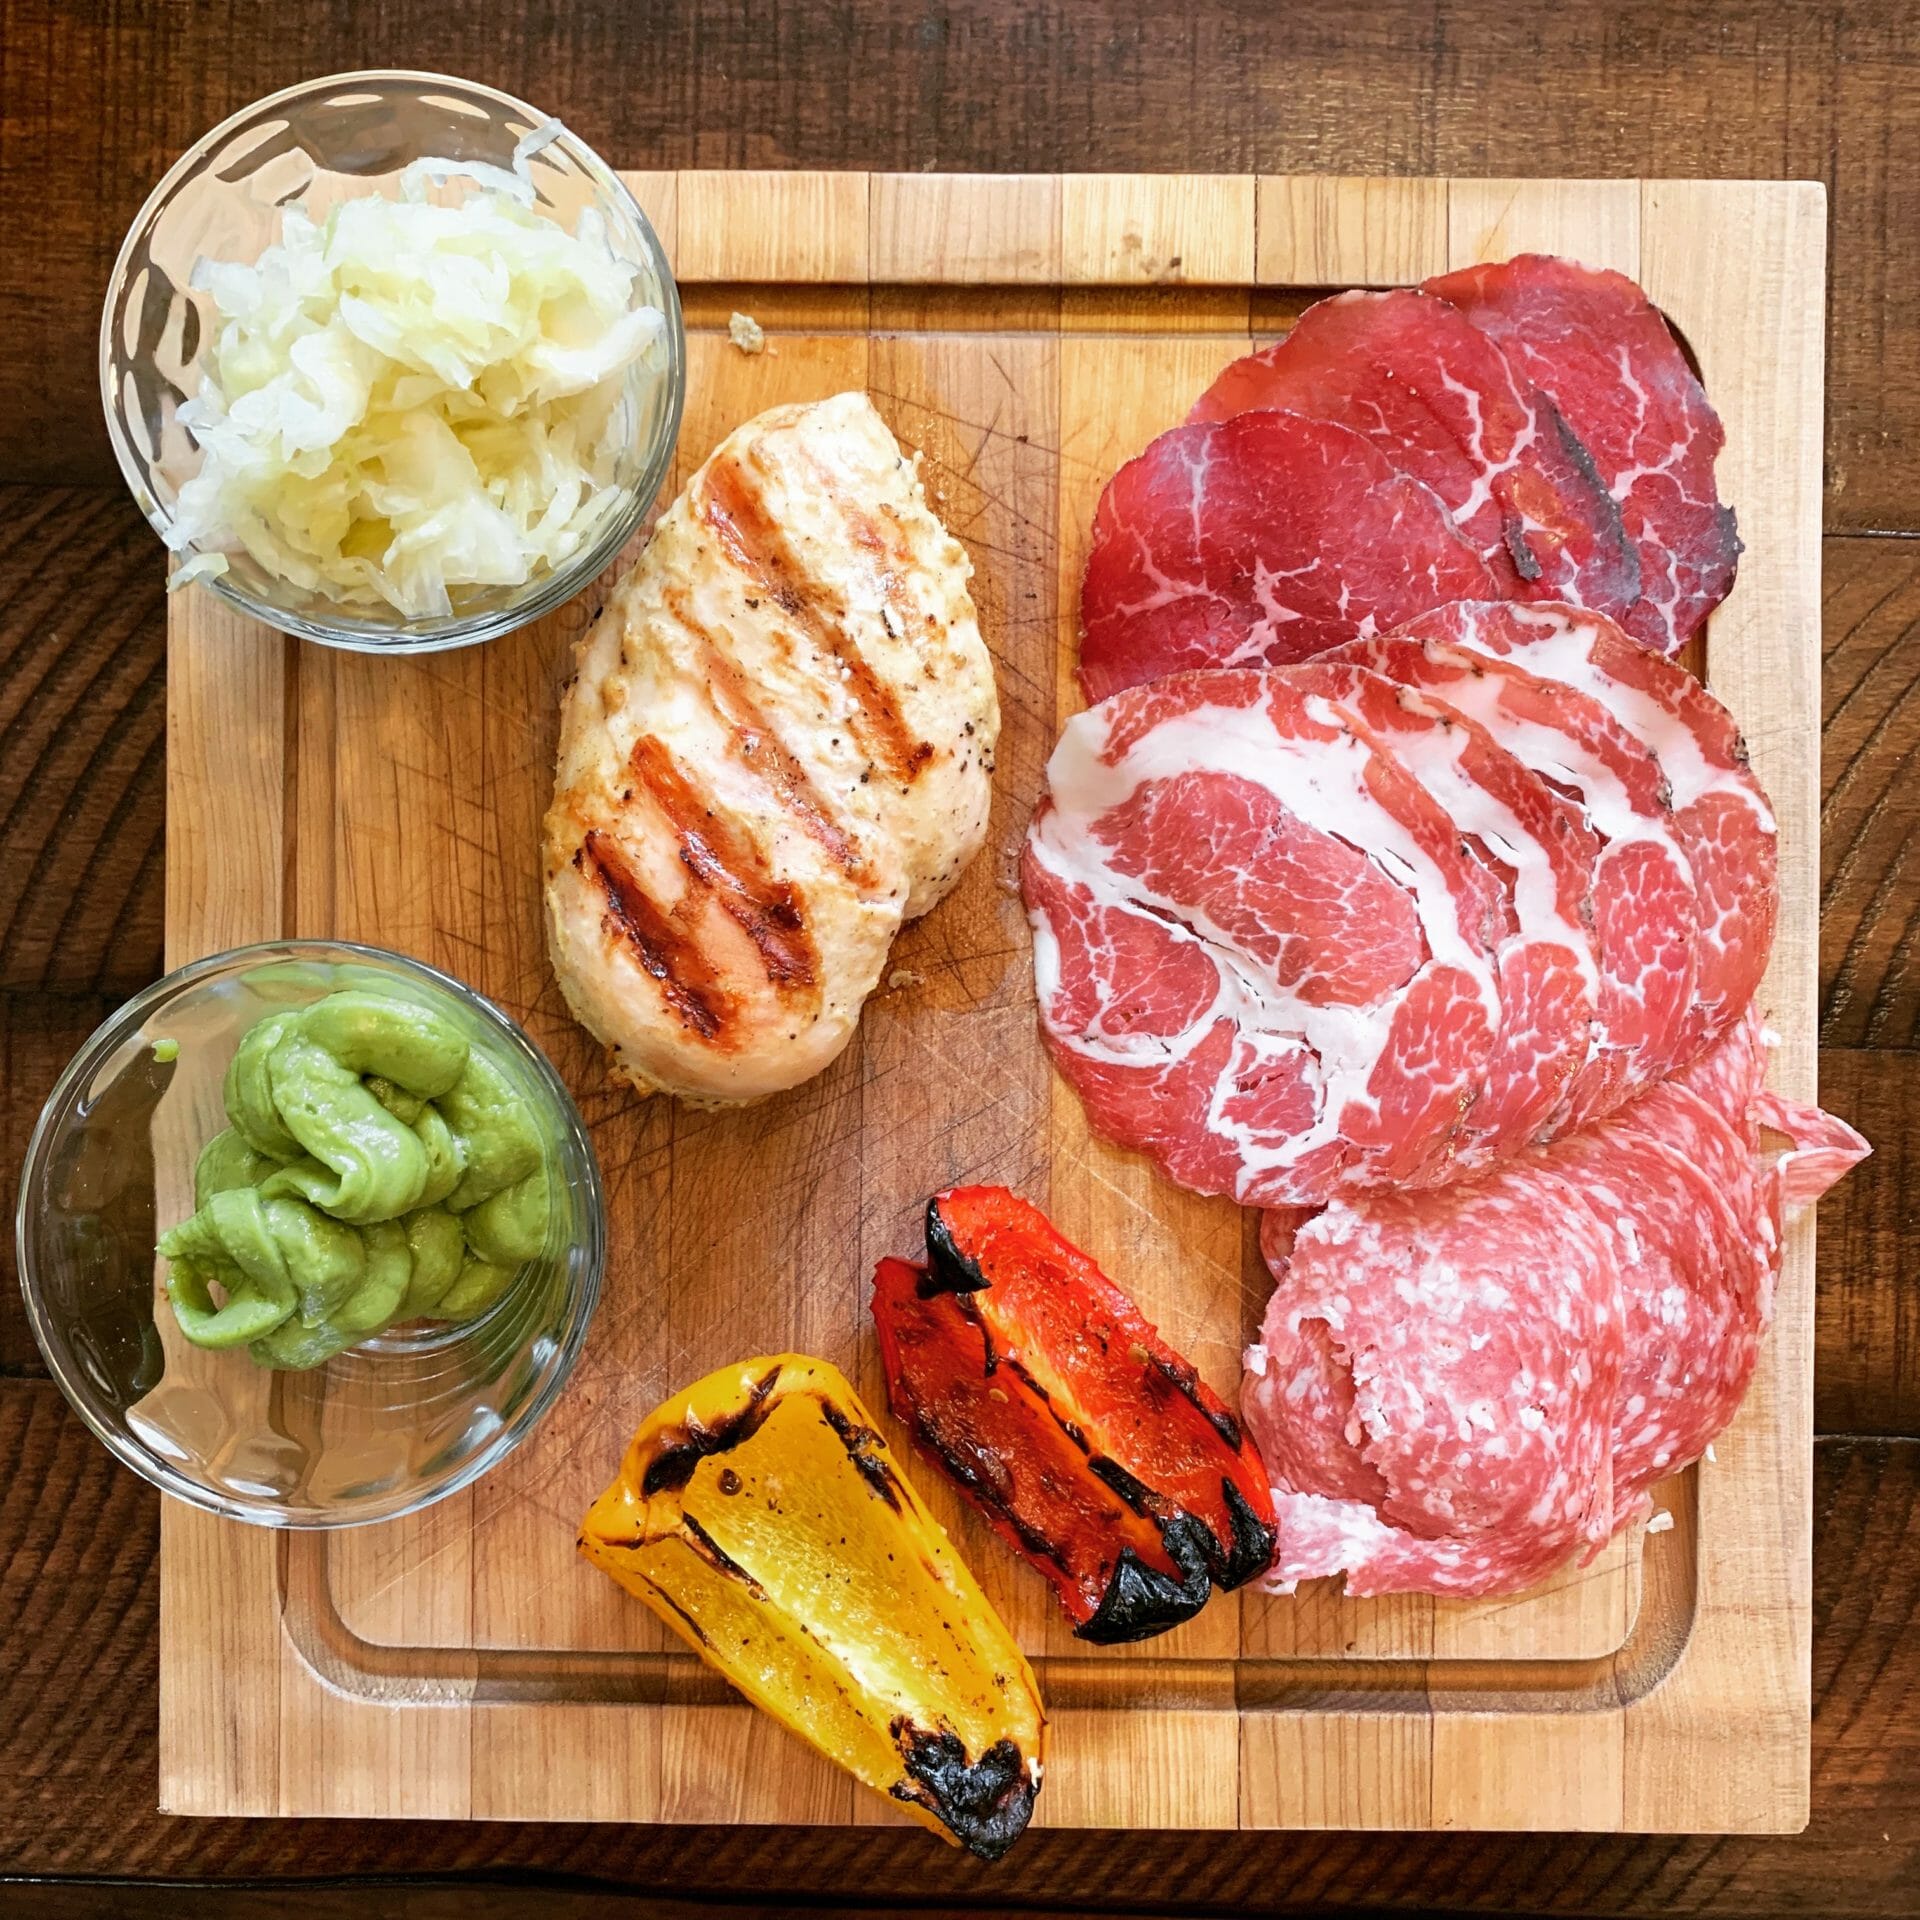 Grilled chicken with uncured cold cuts, sauerkraut, guacamole and grilled peppers